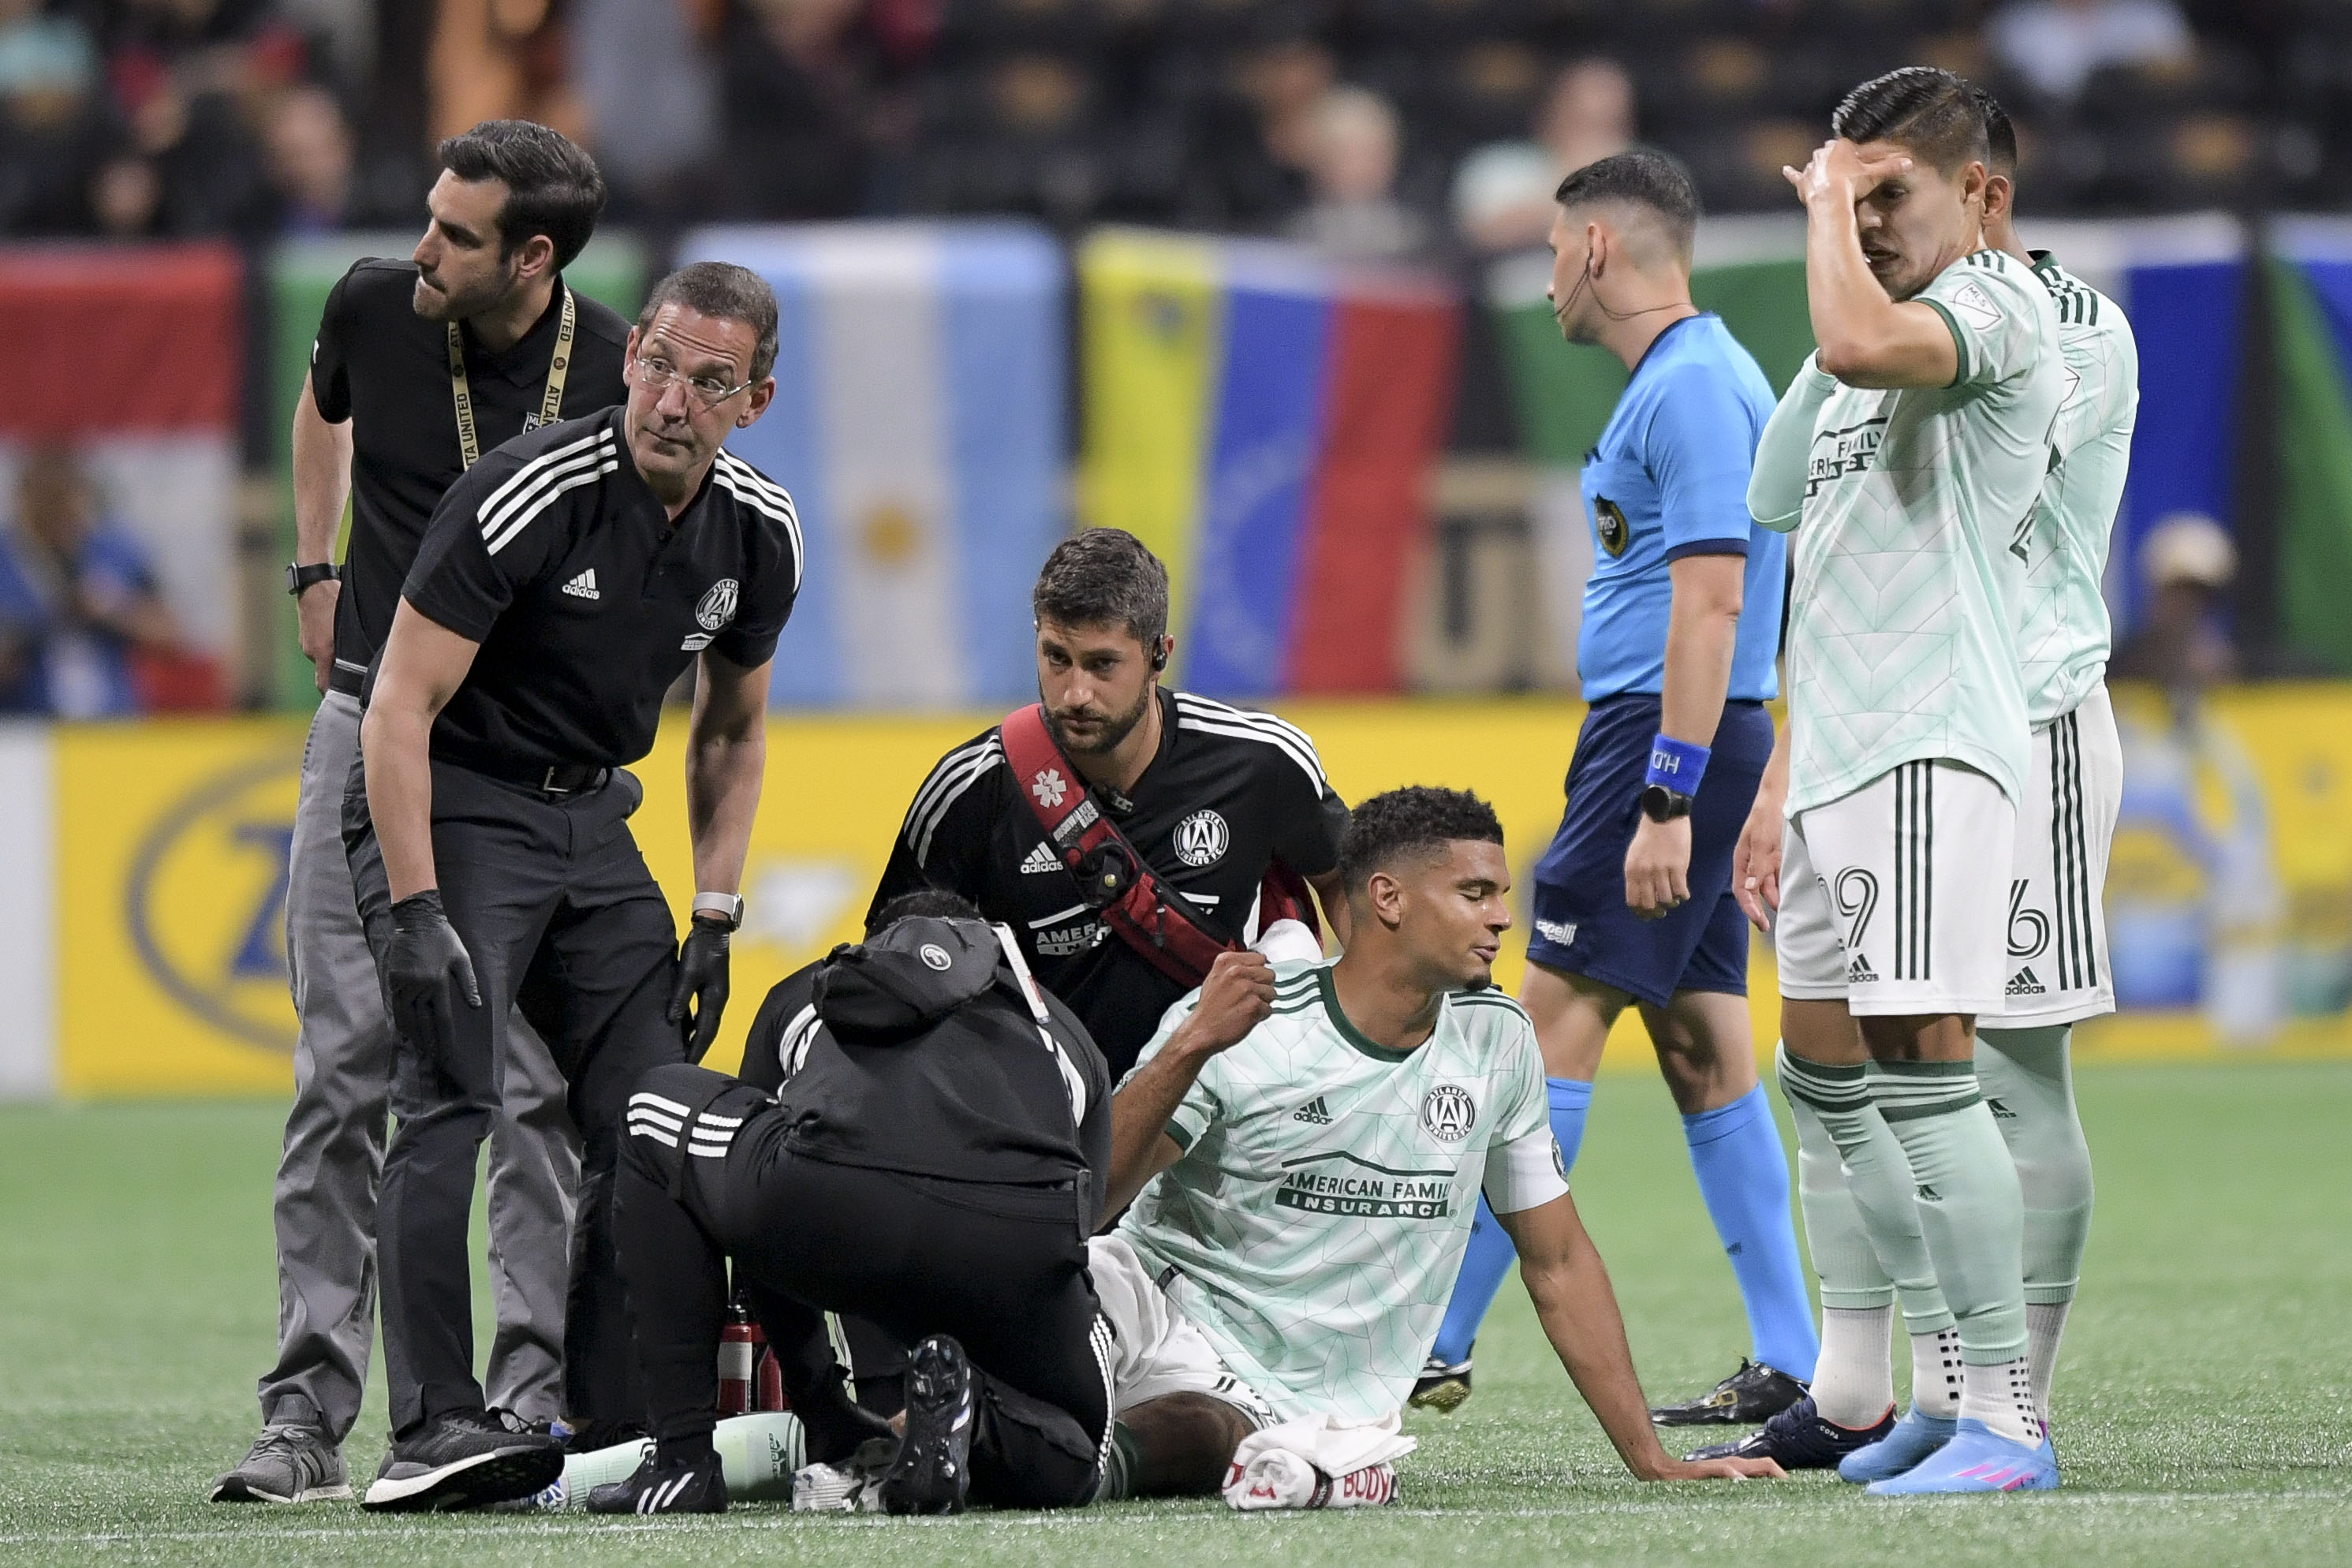 Atlanta United's Miles Robinson to have MRI after leaving field on stretcher